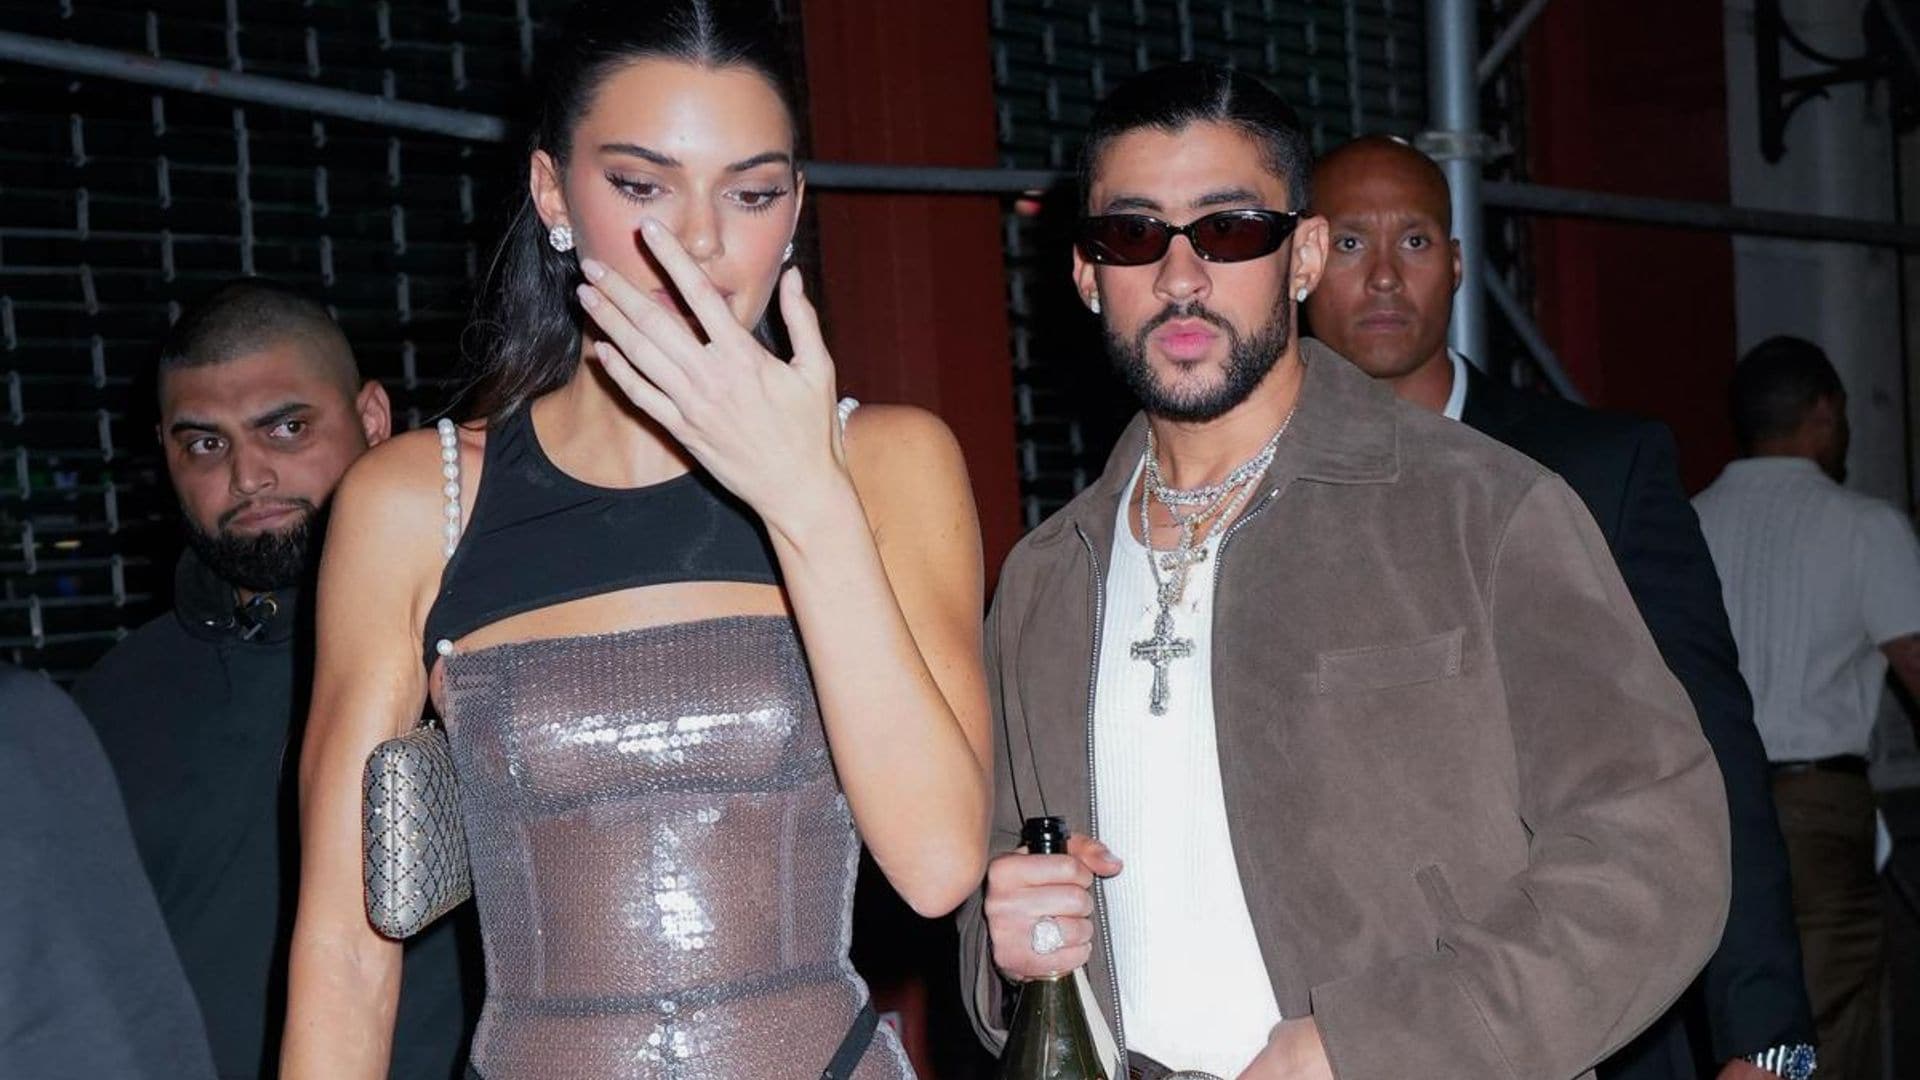 Bad Bunny and Kendall Jenner confirmed to be together again after ‘missing each other’